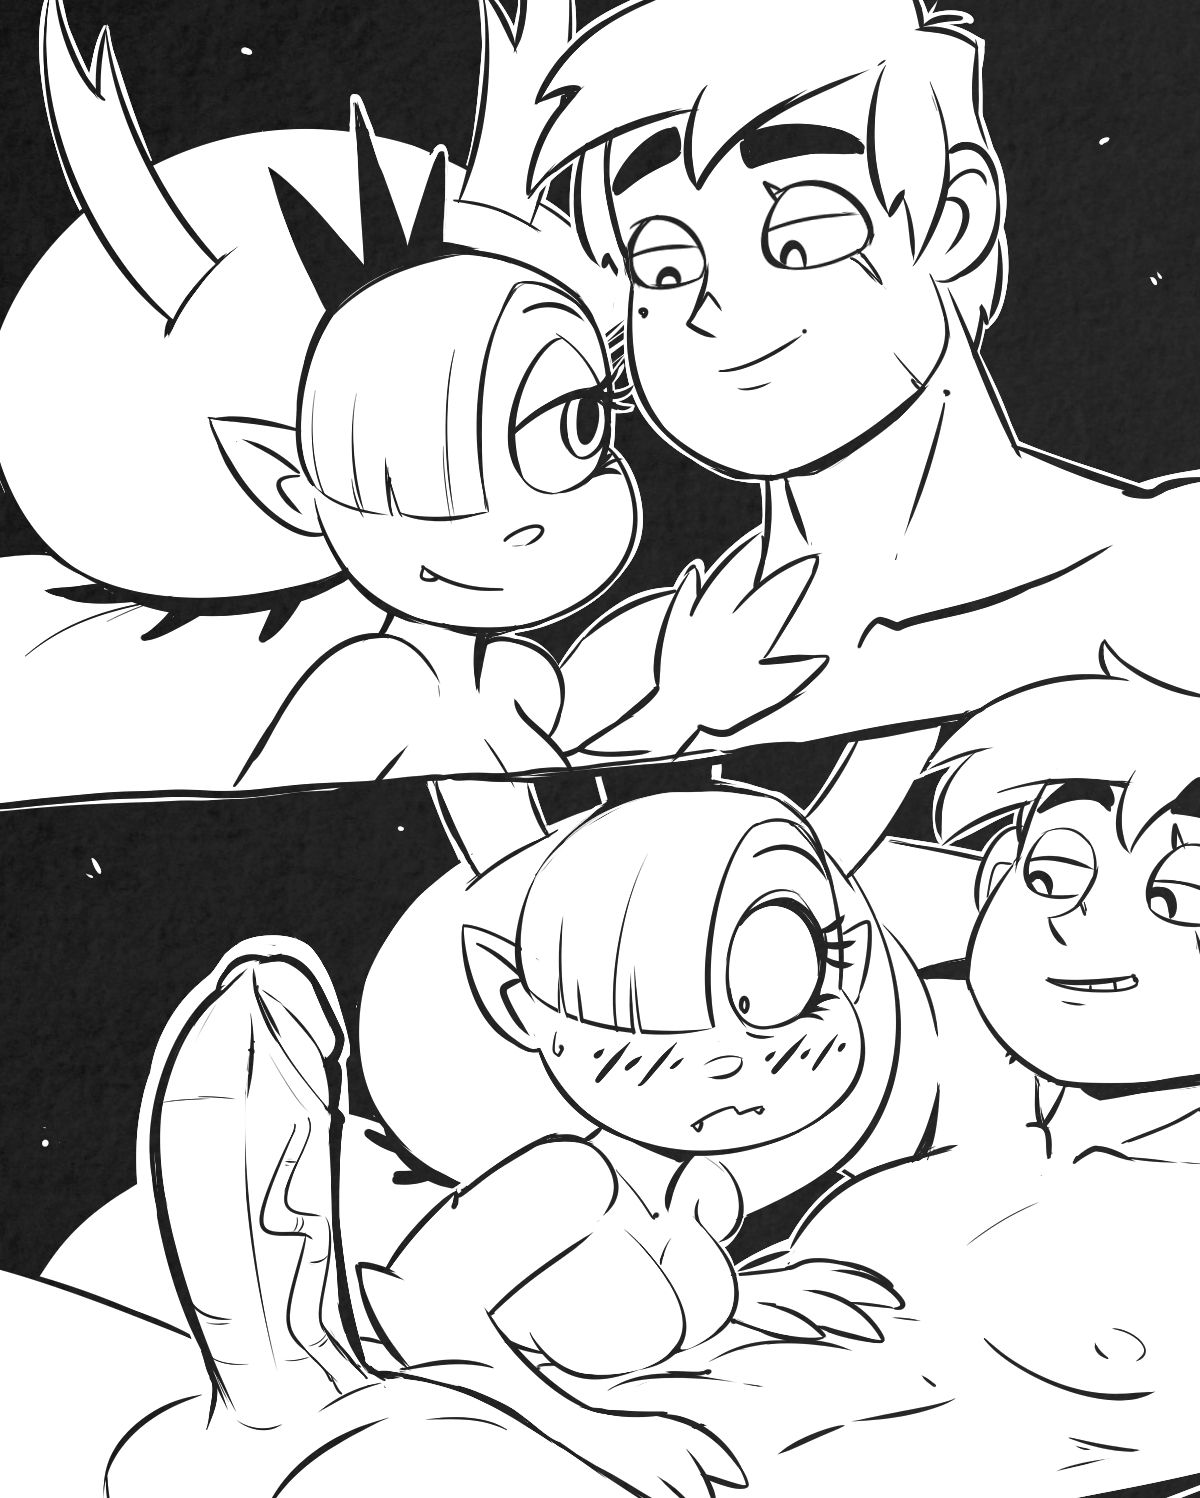 Markapoo - ADULTS ONLY 17